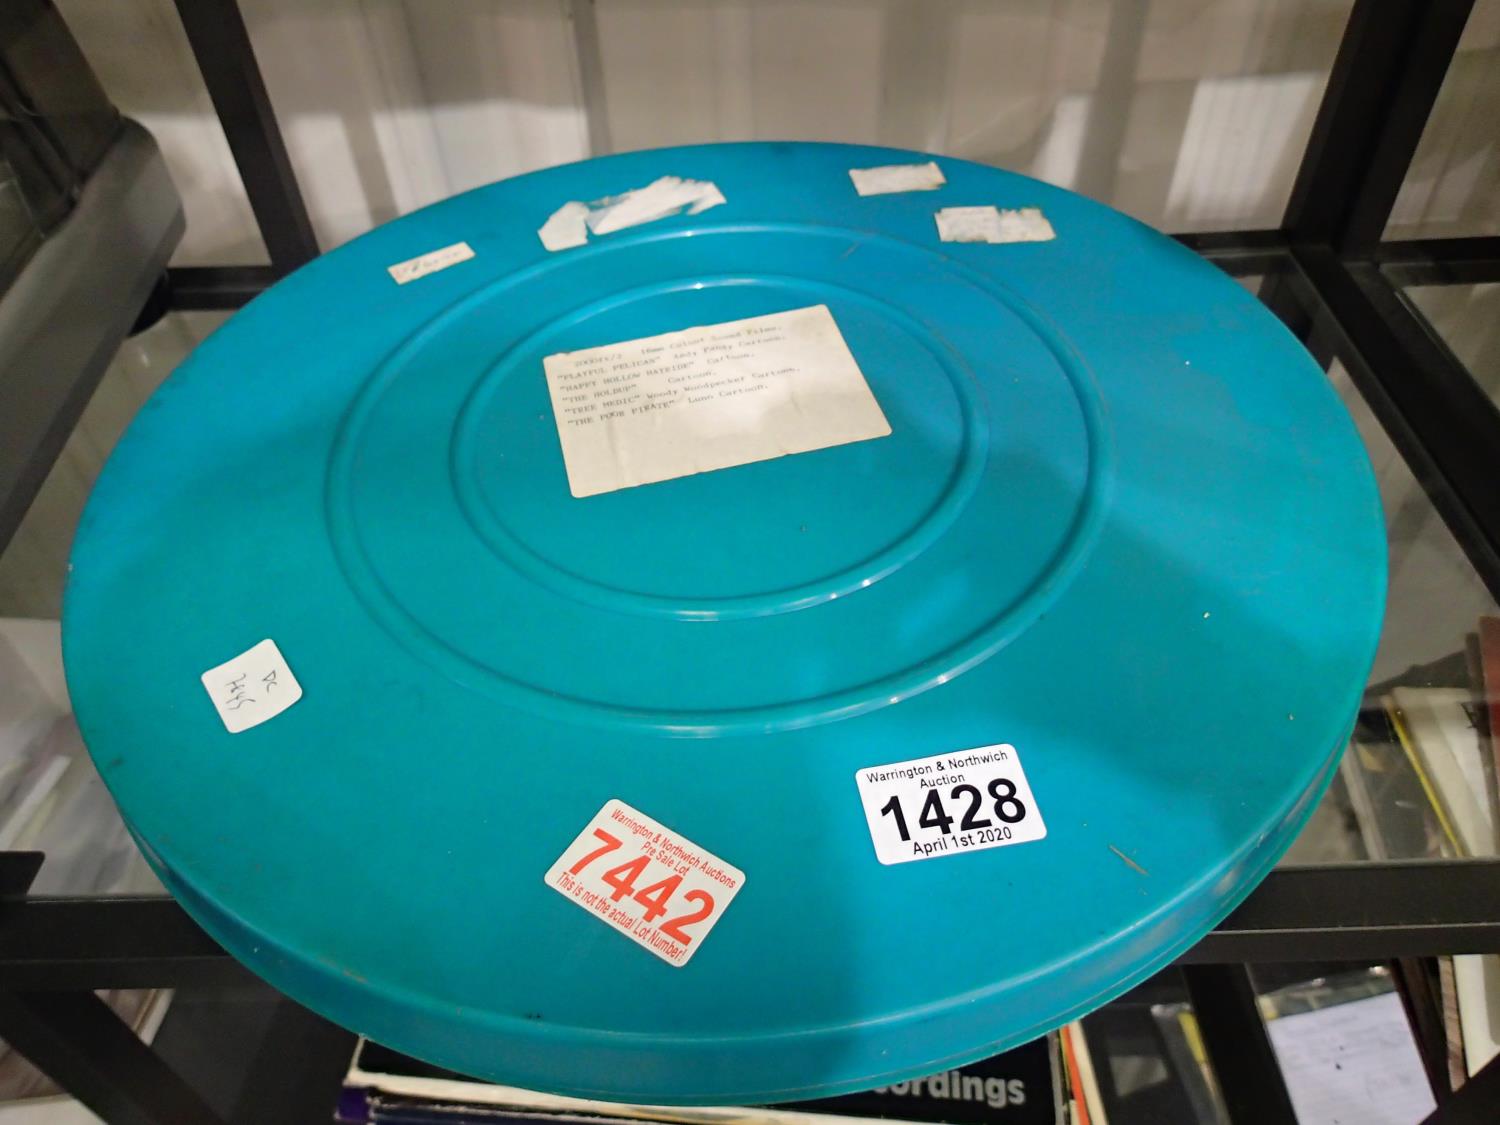 16mm film containing cartoons to include Woody Woodpecker and Andy Pandy and an empty film reel